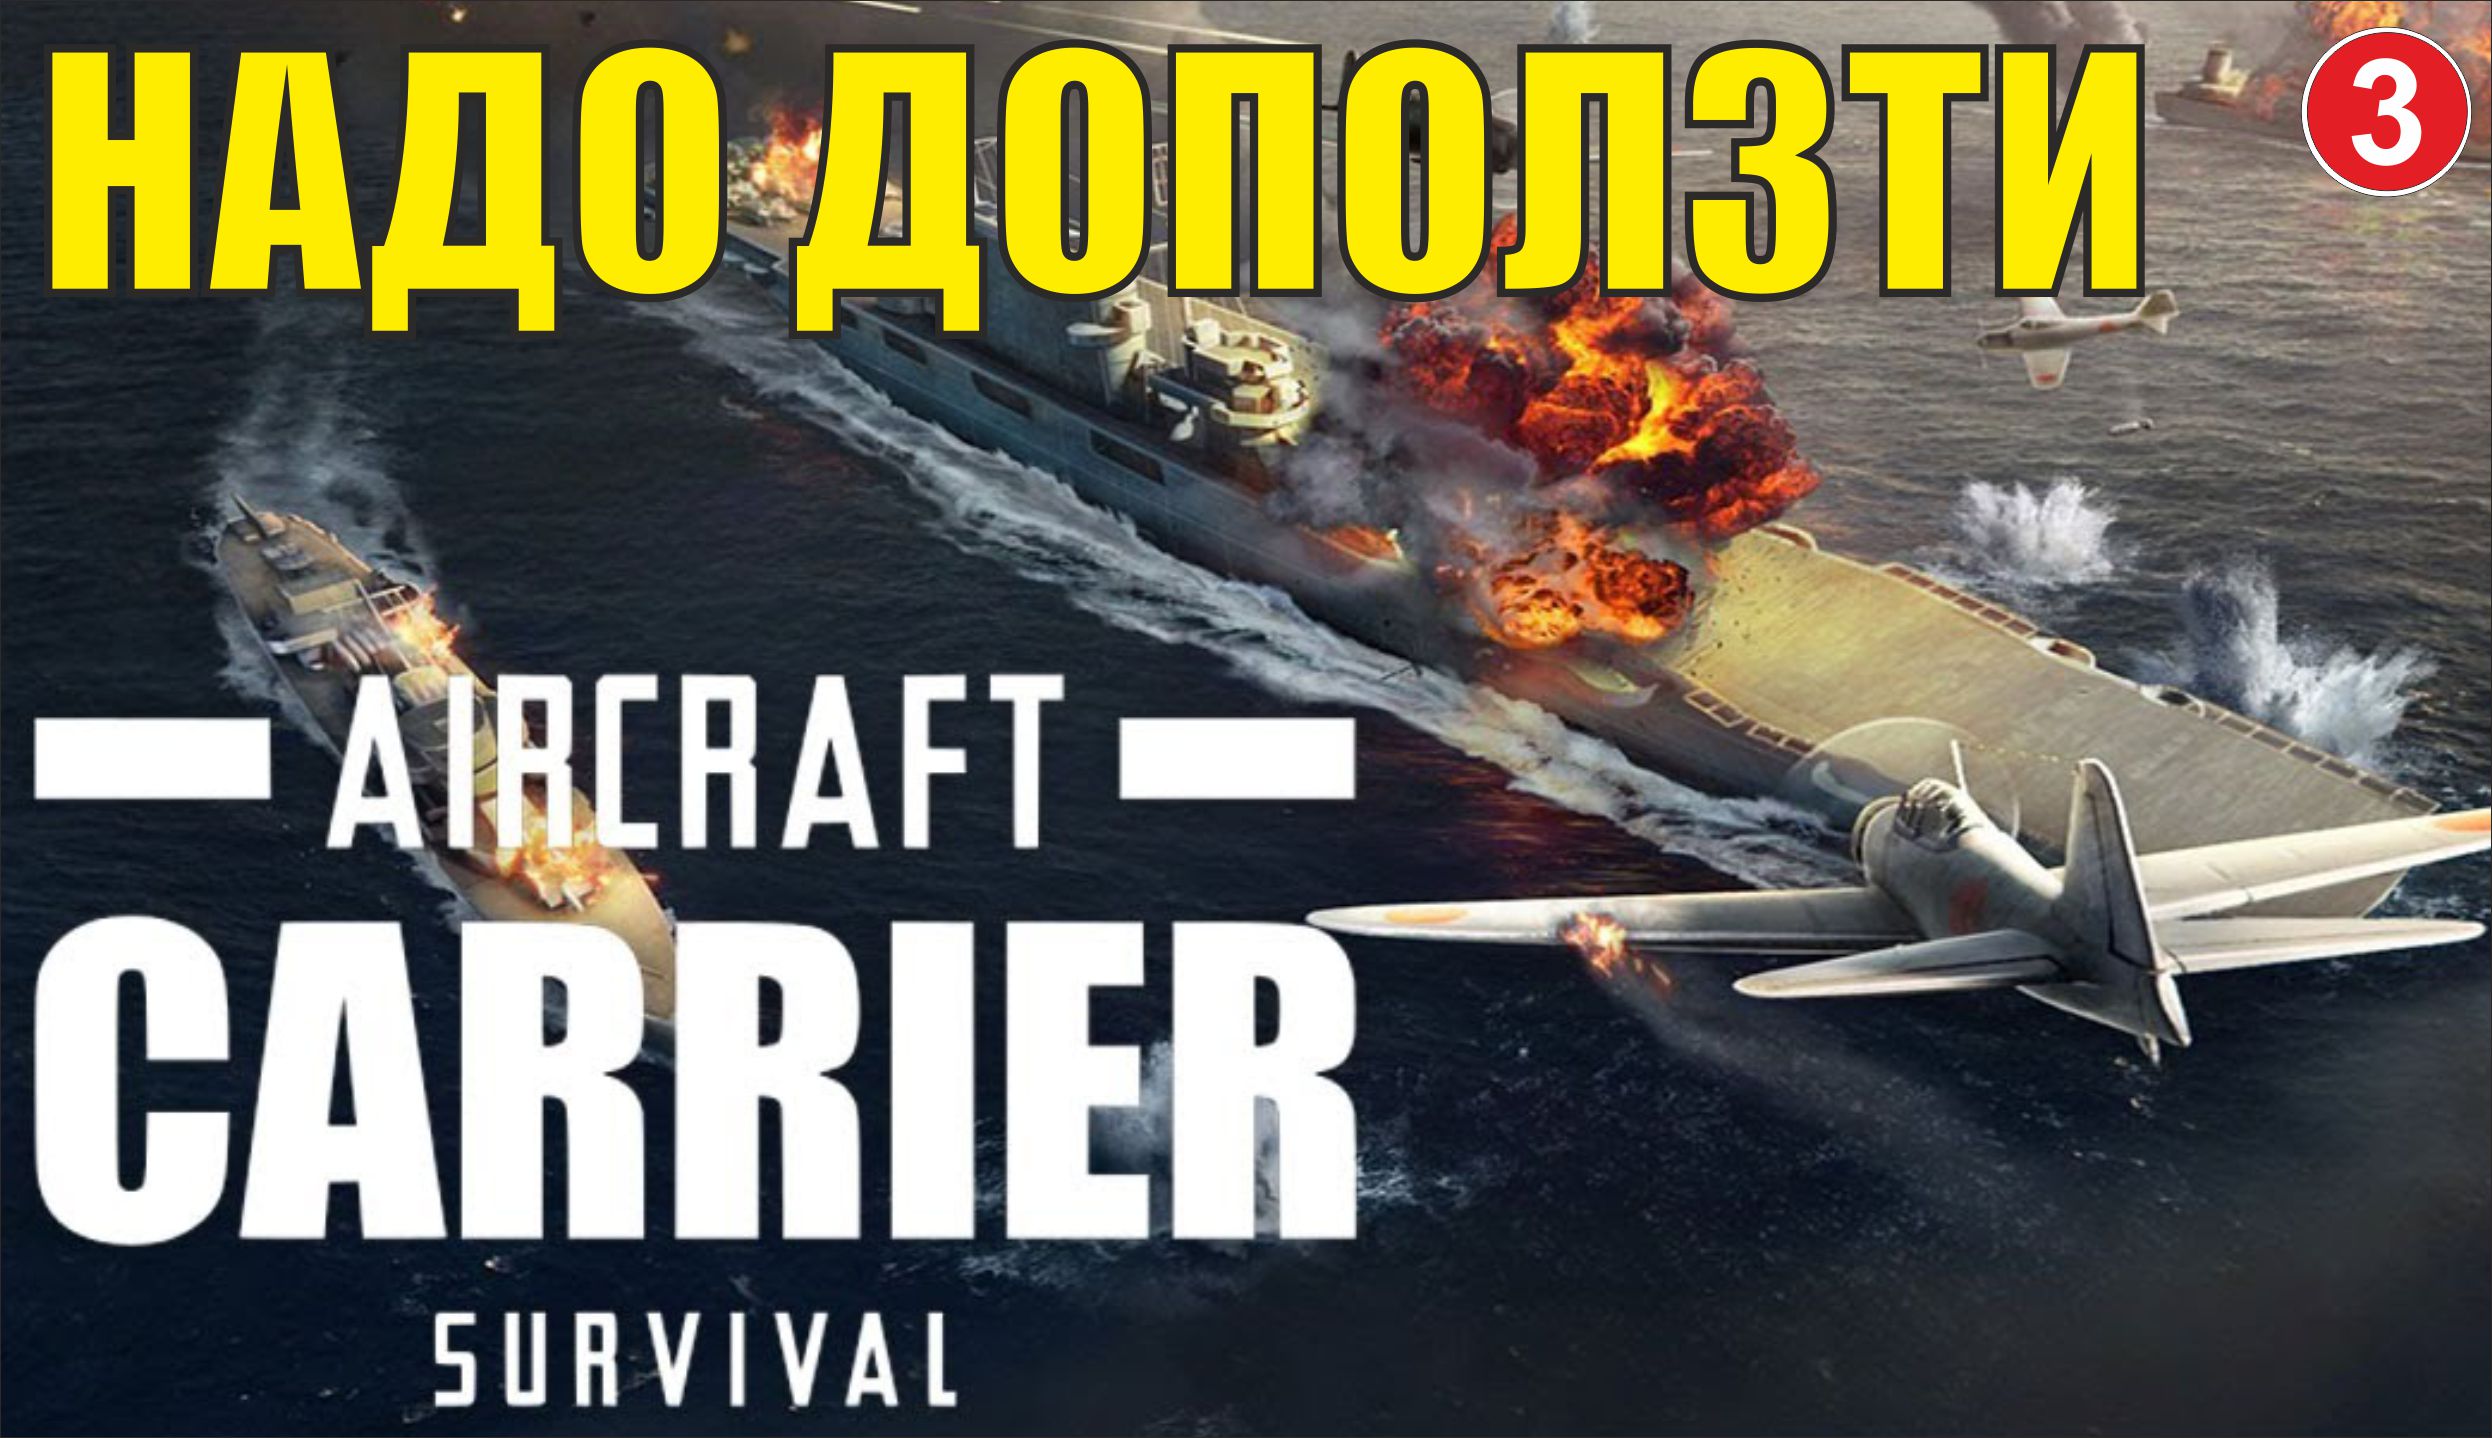 Aircraft Carrier Survival - Надо доползти